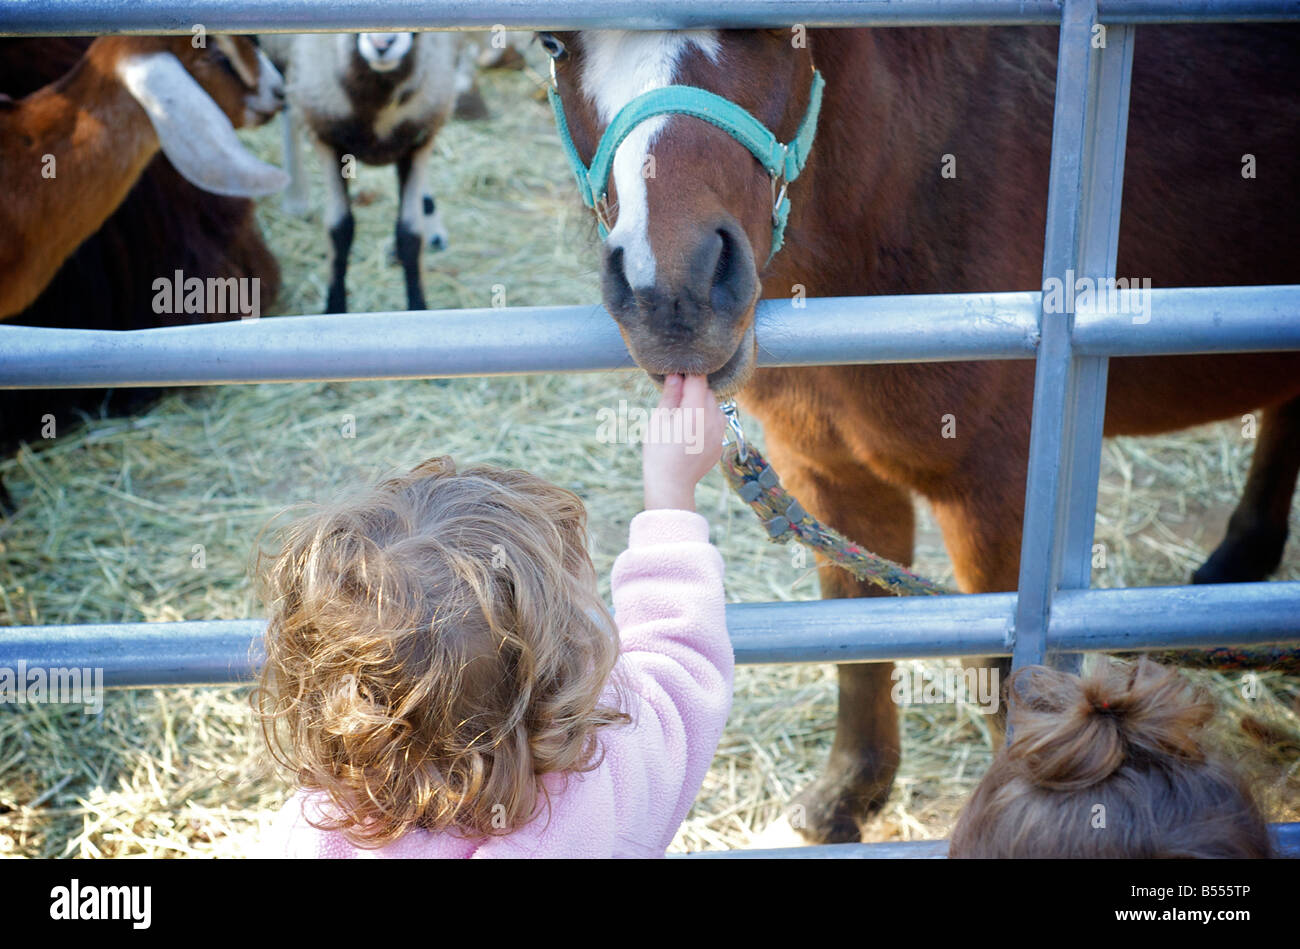 Child Feeds Horse at Petting Zoo at Farm Stock Photo